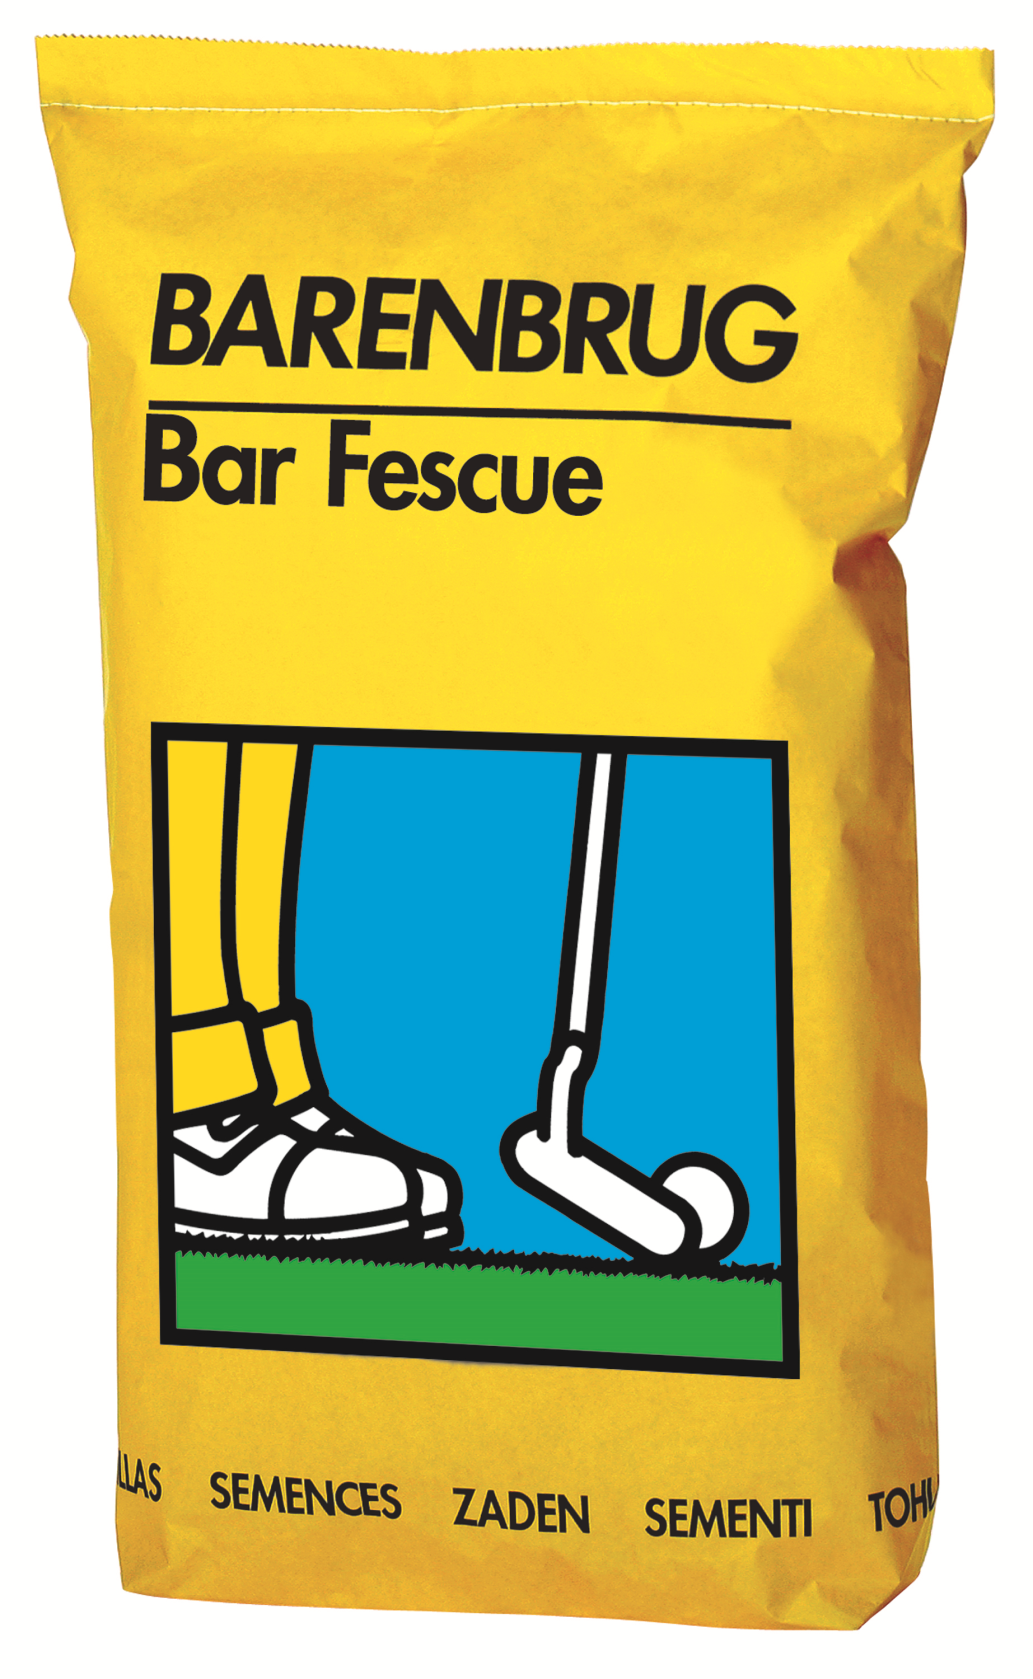 Barenbrug Bar Fescue 15kg - the grass seed for the golfer!